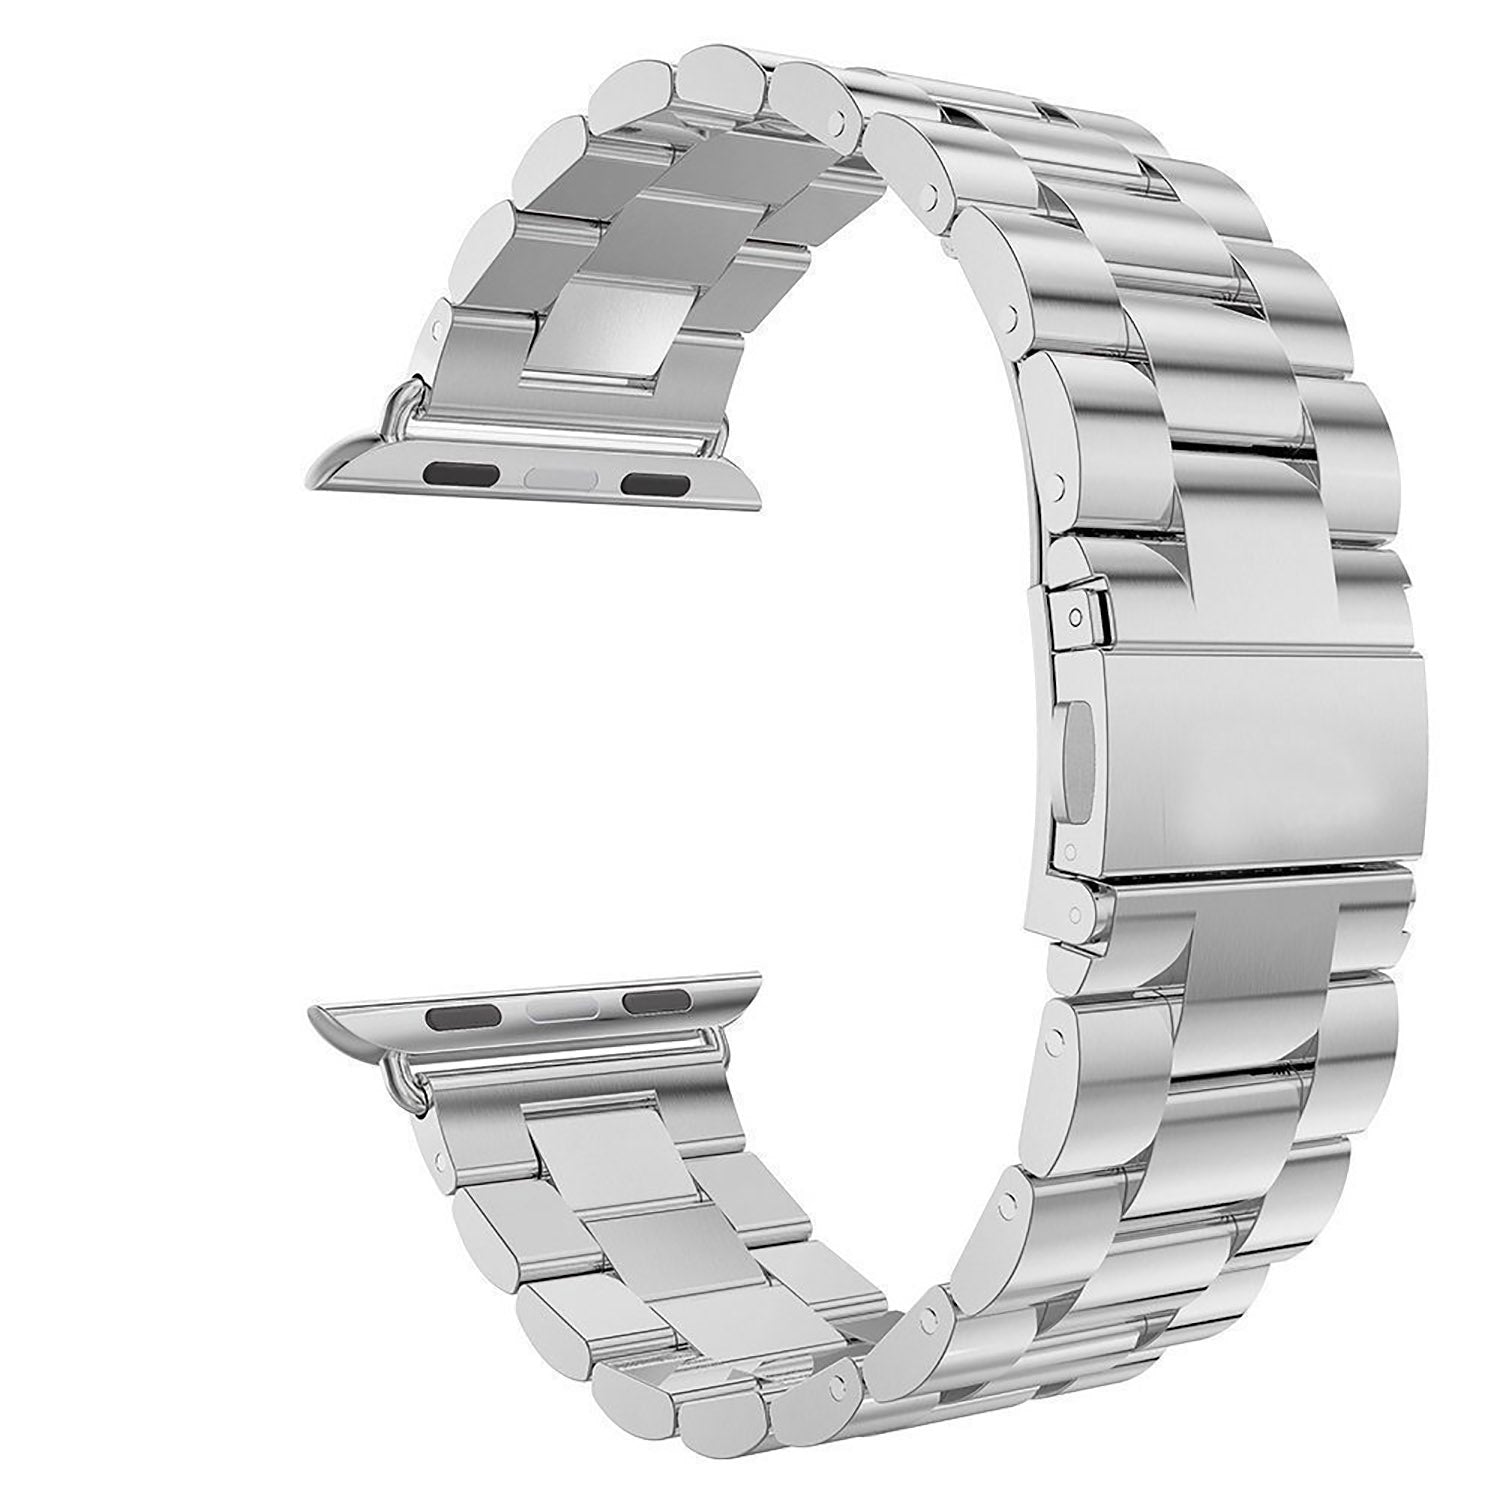 Alex 5 Link Watch Band in Silver Stainless Steel